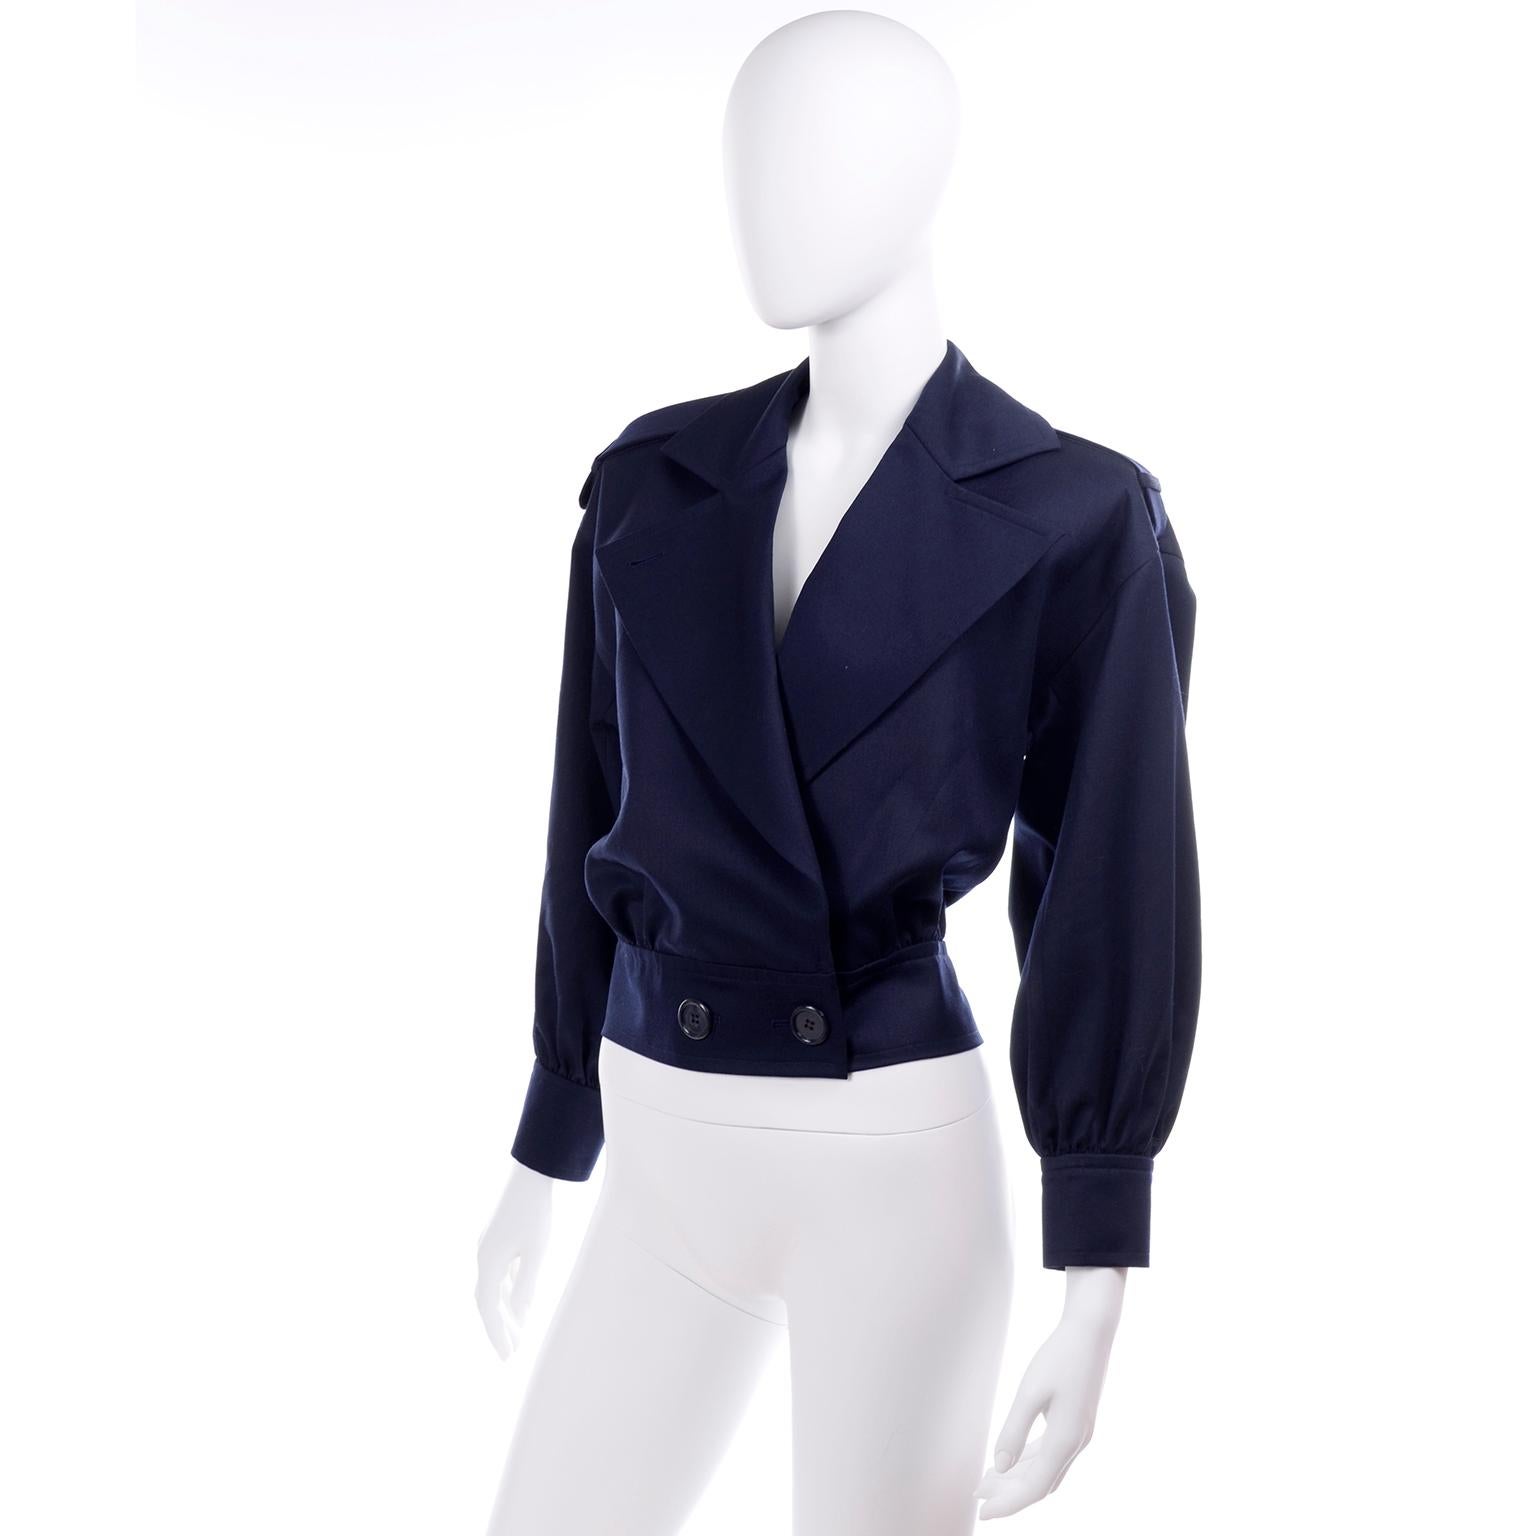 This is a wonderful, deadstock, Yves Saint Laurent Variation jacket in navy blue summer weight wool. The jacket is fully lined and closes with two buttons at the waist. There are epaulettes and the hem and cuffs are gathered. A great, unworn jacket